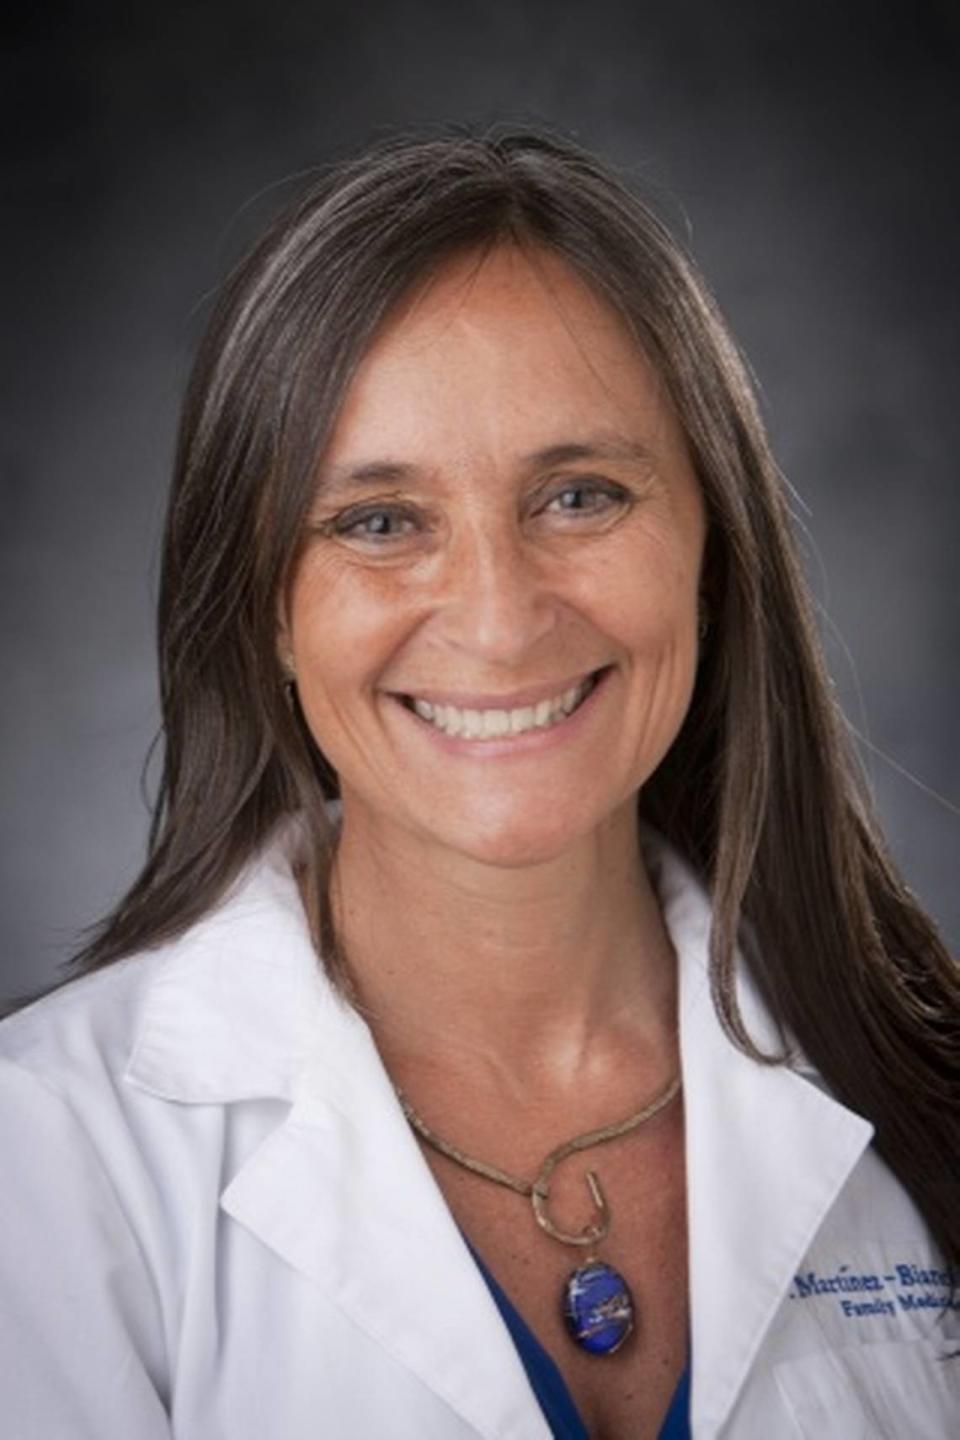 Dr. Viviana Martinez-Bianchi is a Duke Health family medicine physician and one of the co-founders of LATIN-19, a group that advocates for the Hispanic community’s needs during COVID-19. Martinez-Bianchi also serves as an advisor to the N.C. Department of Health and Human Services.